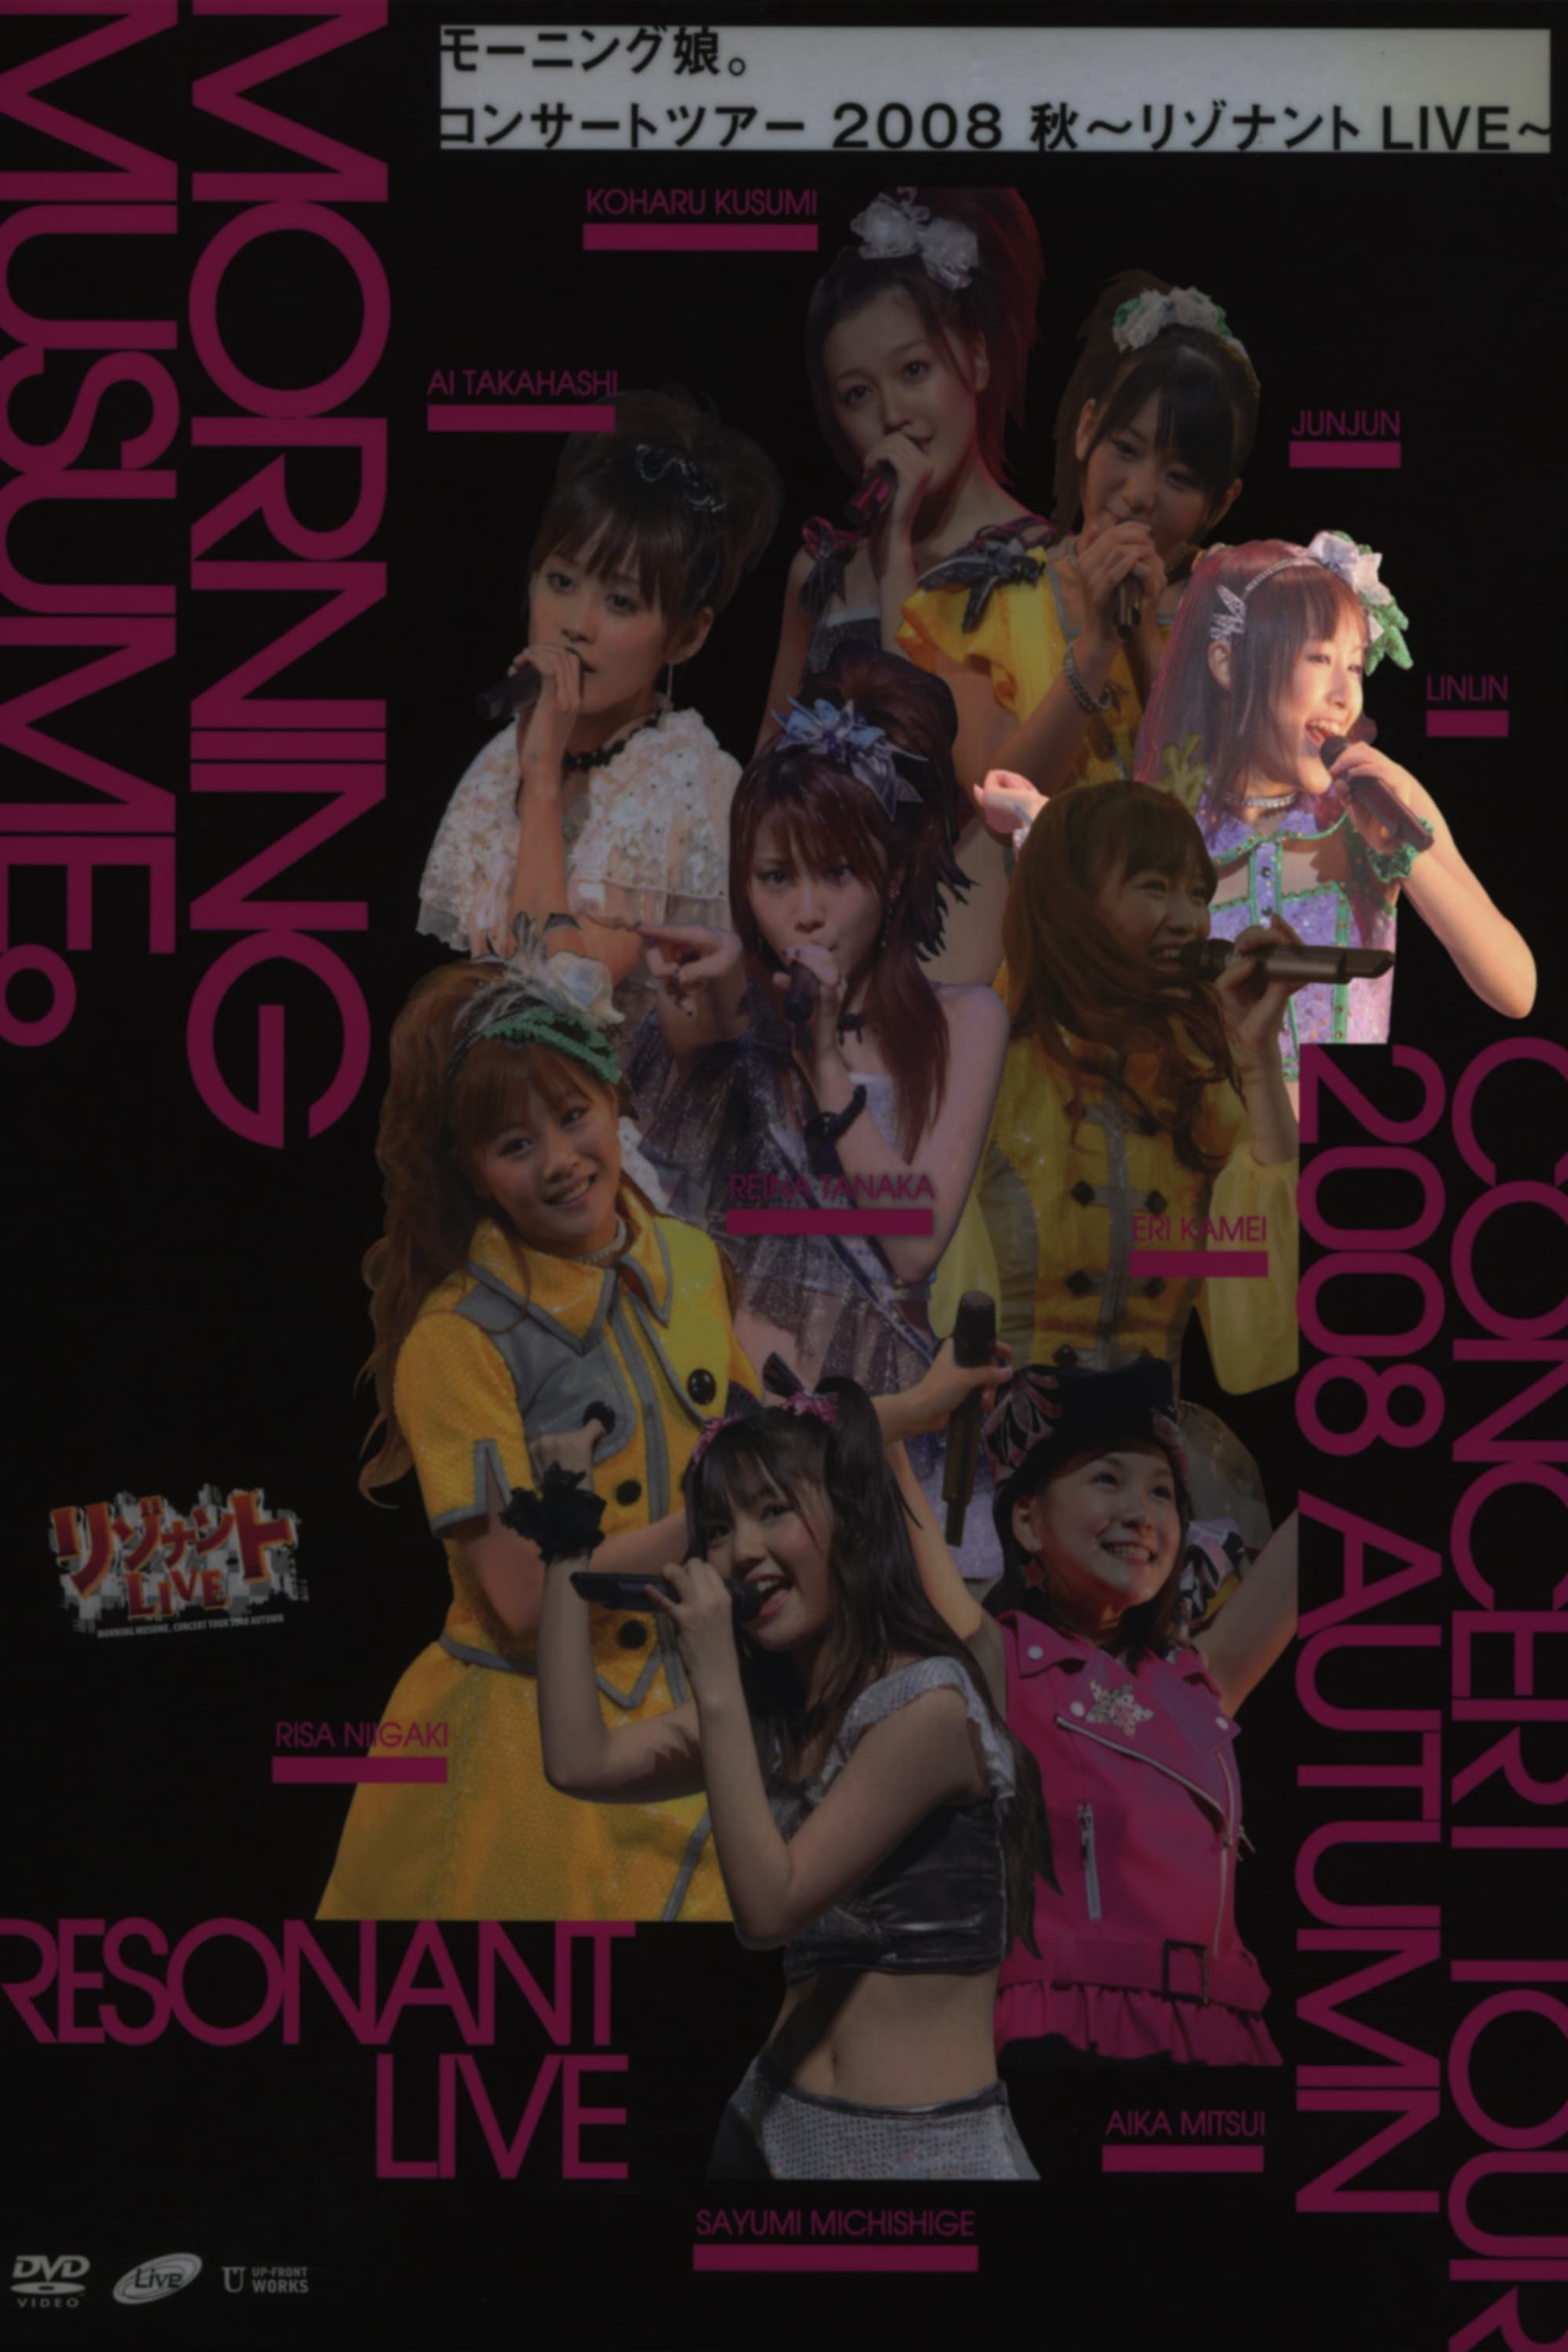 Morning Musume. 2008 Autumn Solo Lin Lin ~Resonant LIVE~